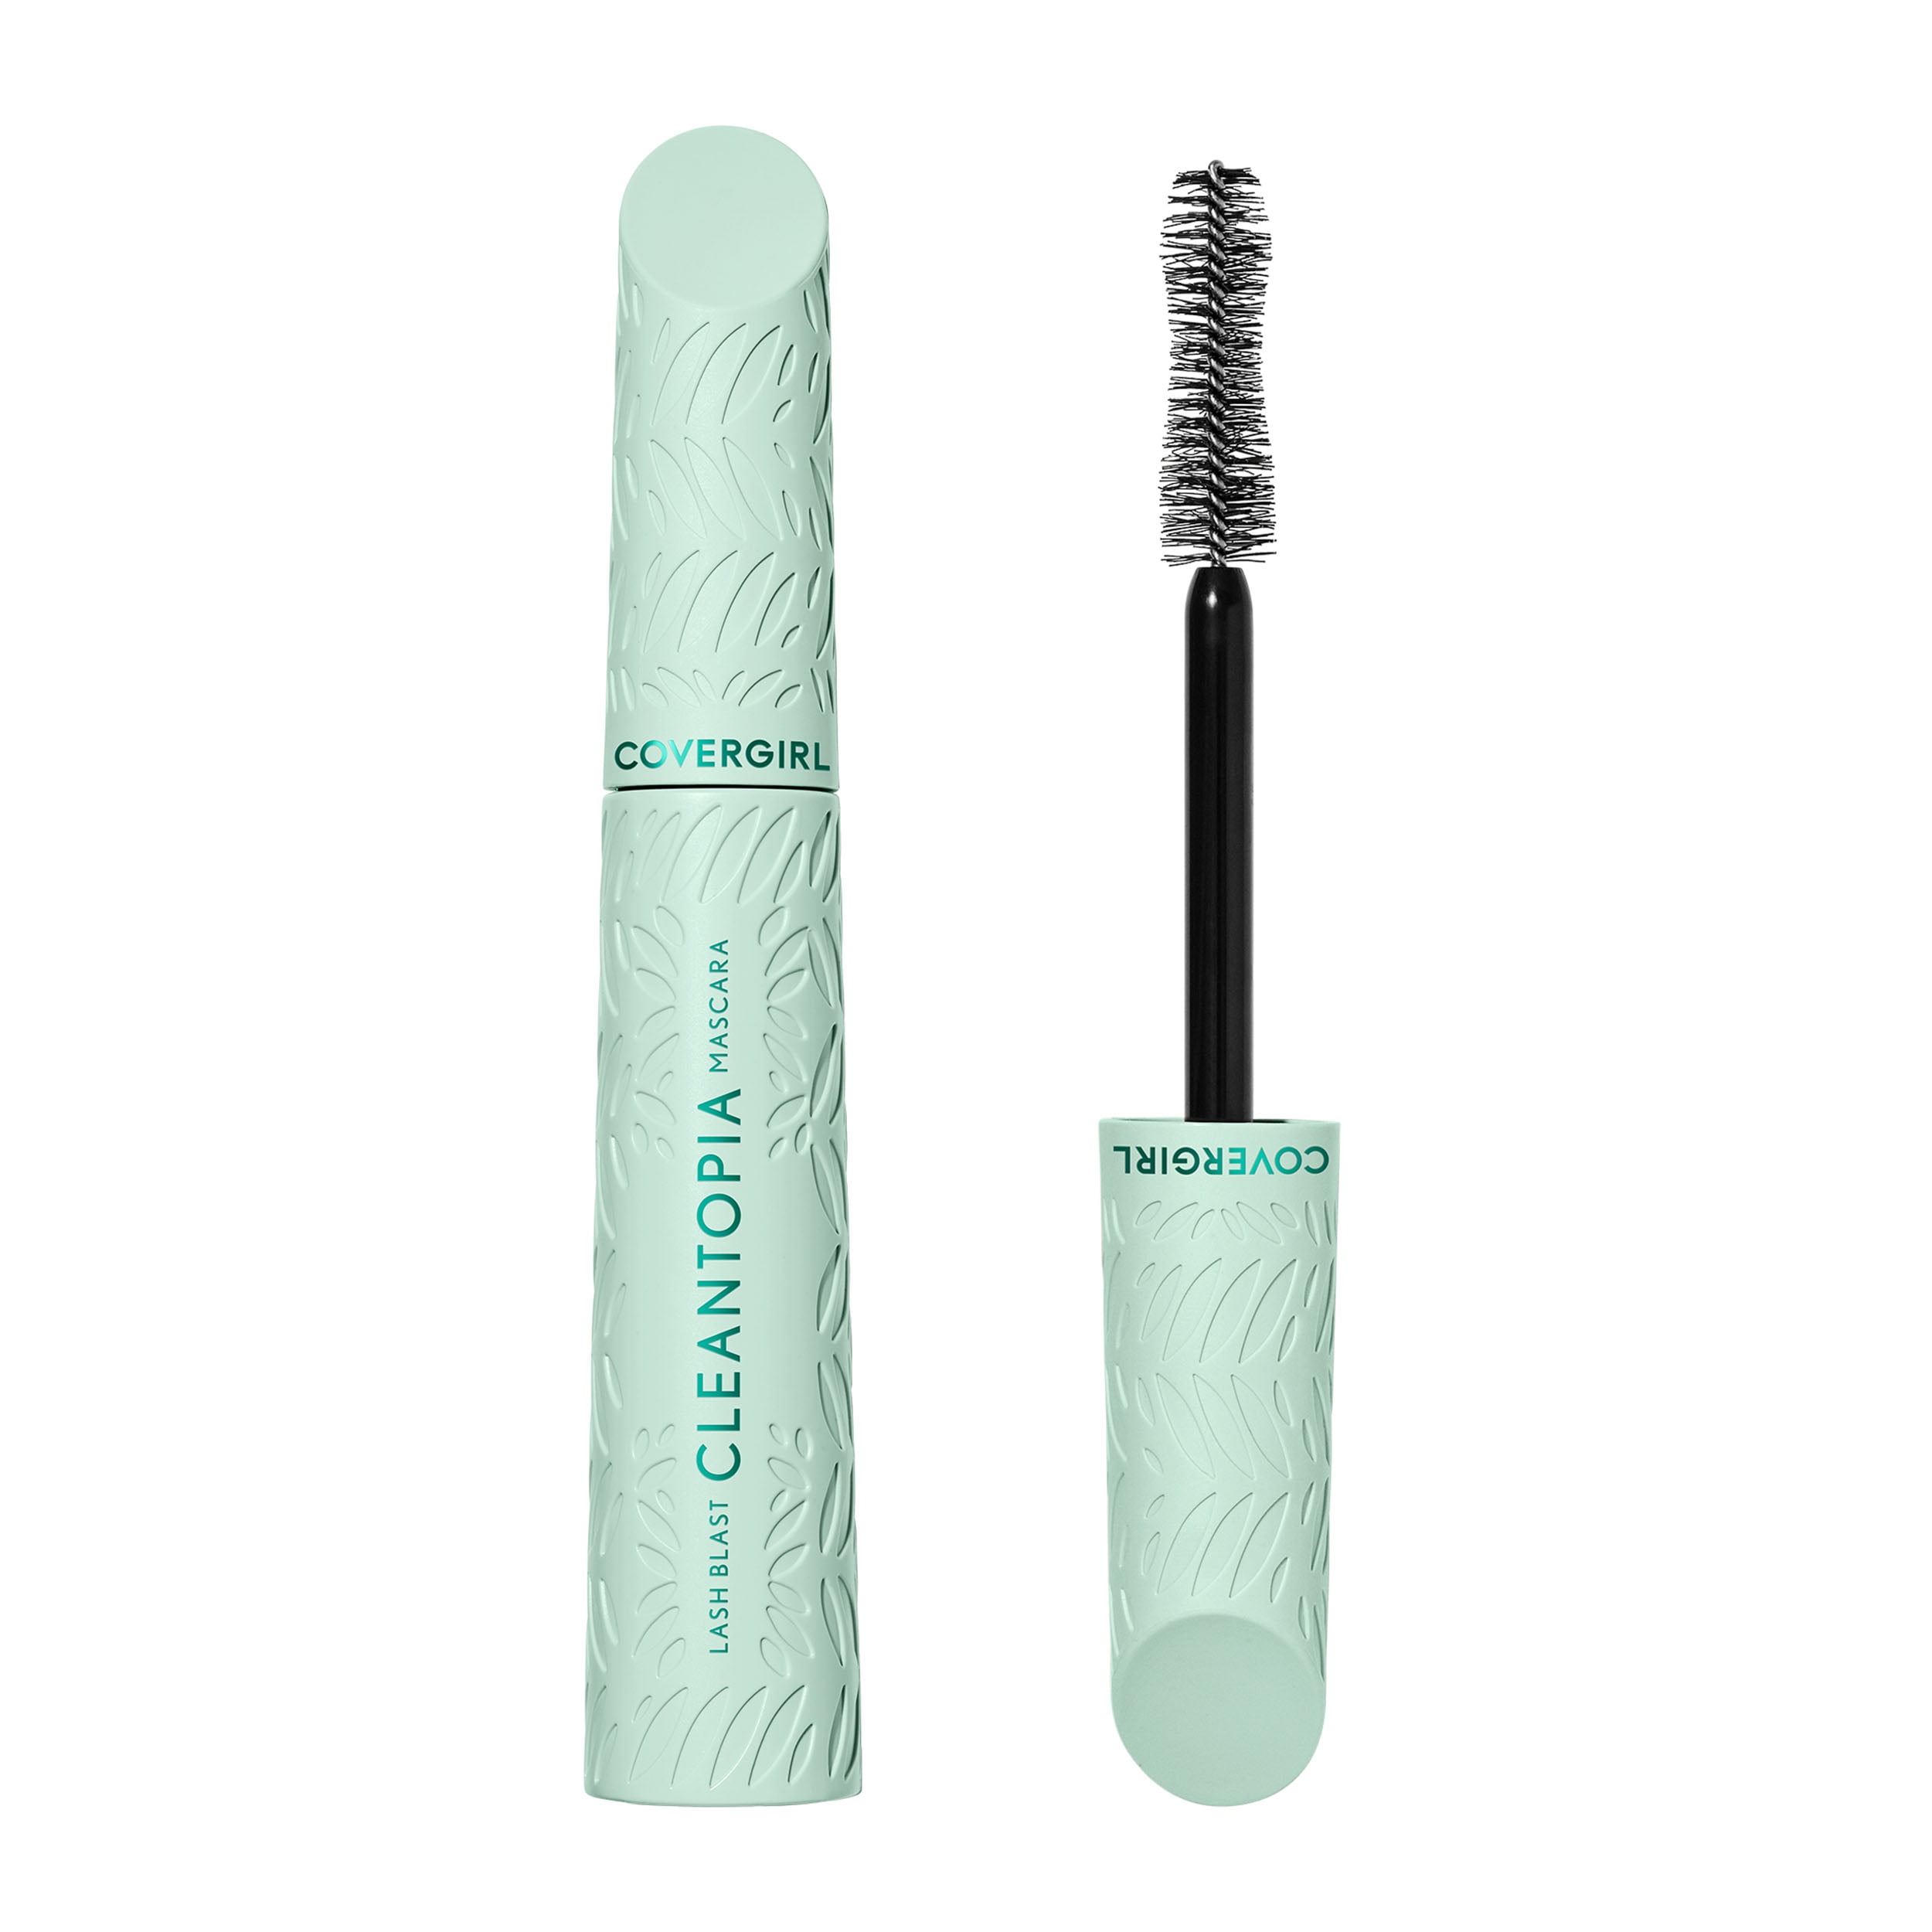 Colorfull mascaras ! - CosmeticObs-Observatoire des Cosmétiques - Focus on  French Launches